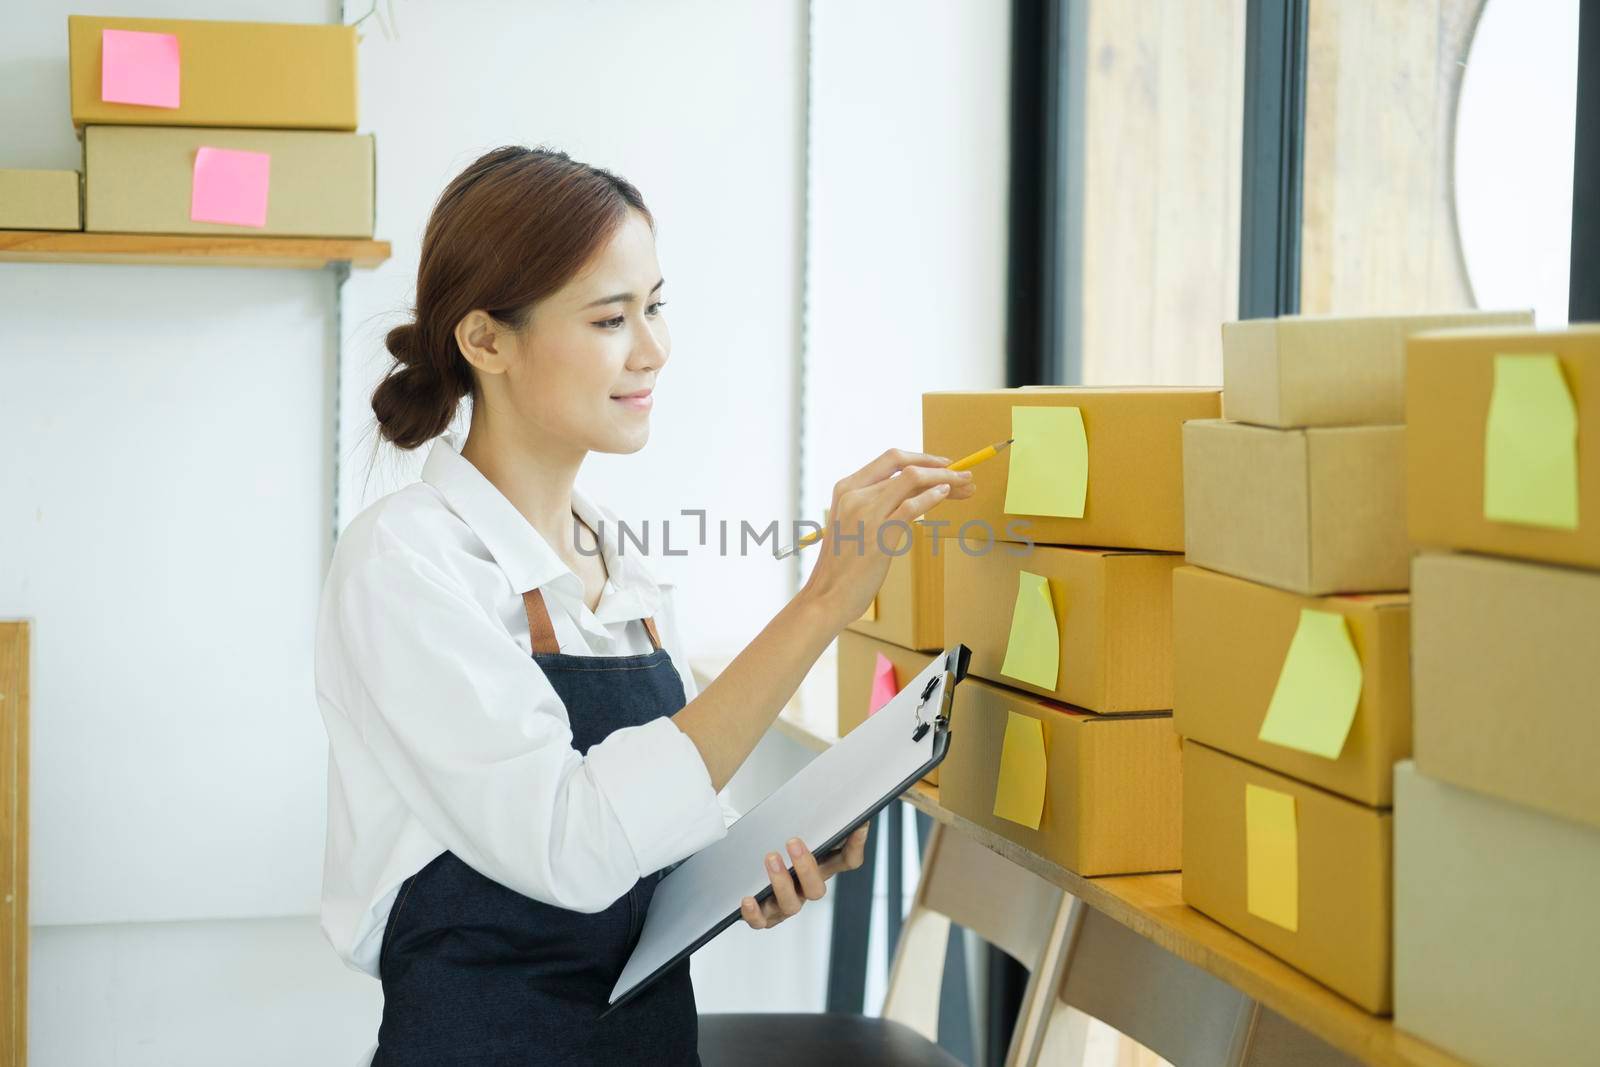 Asian female small online business owner packing boxes on table and checking retail order preparing for shipment. Online business, e-commerce concept.